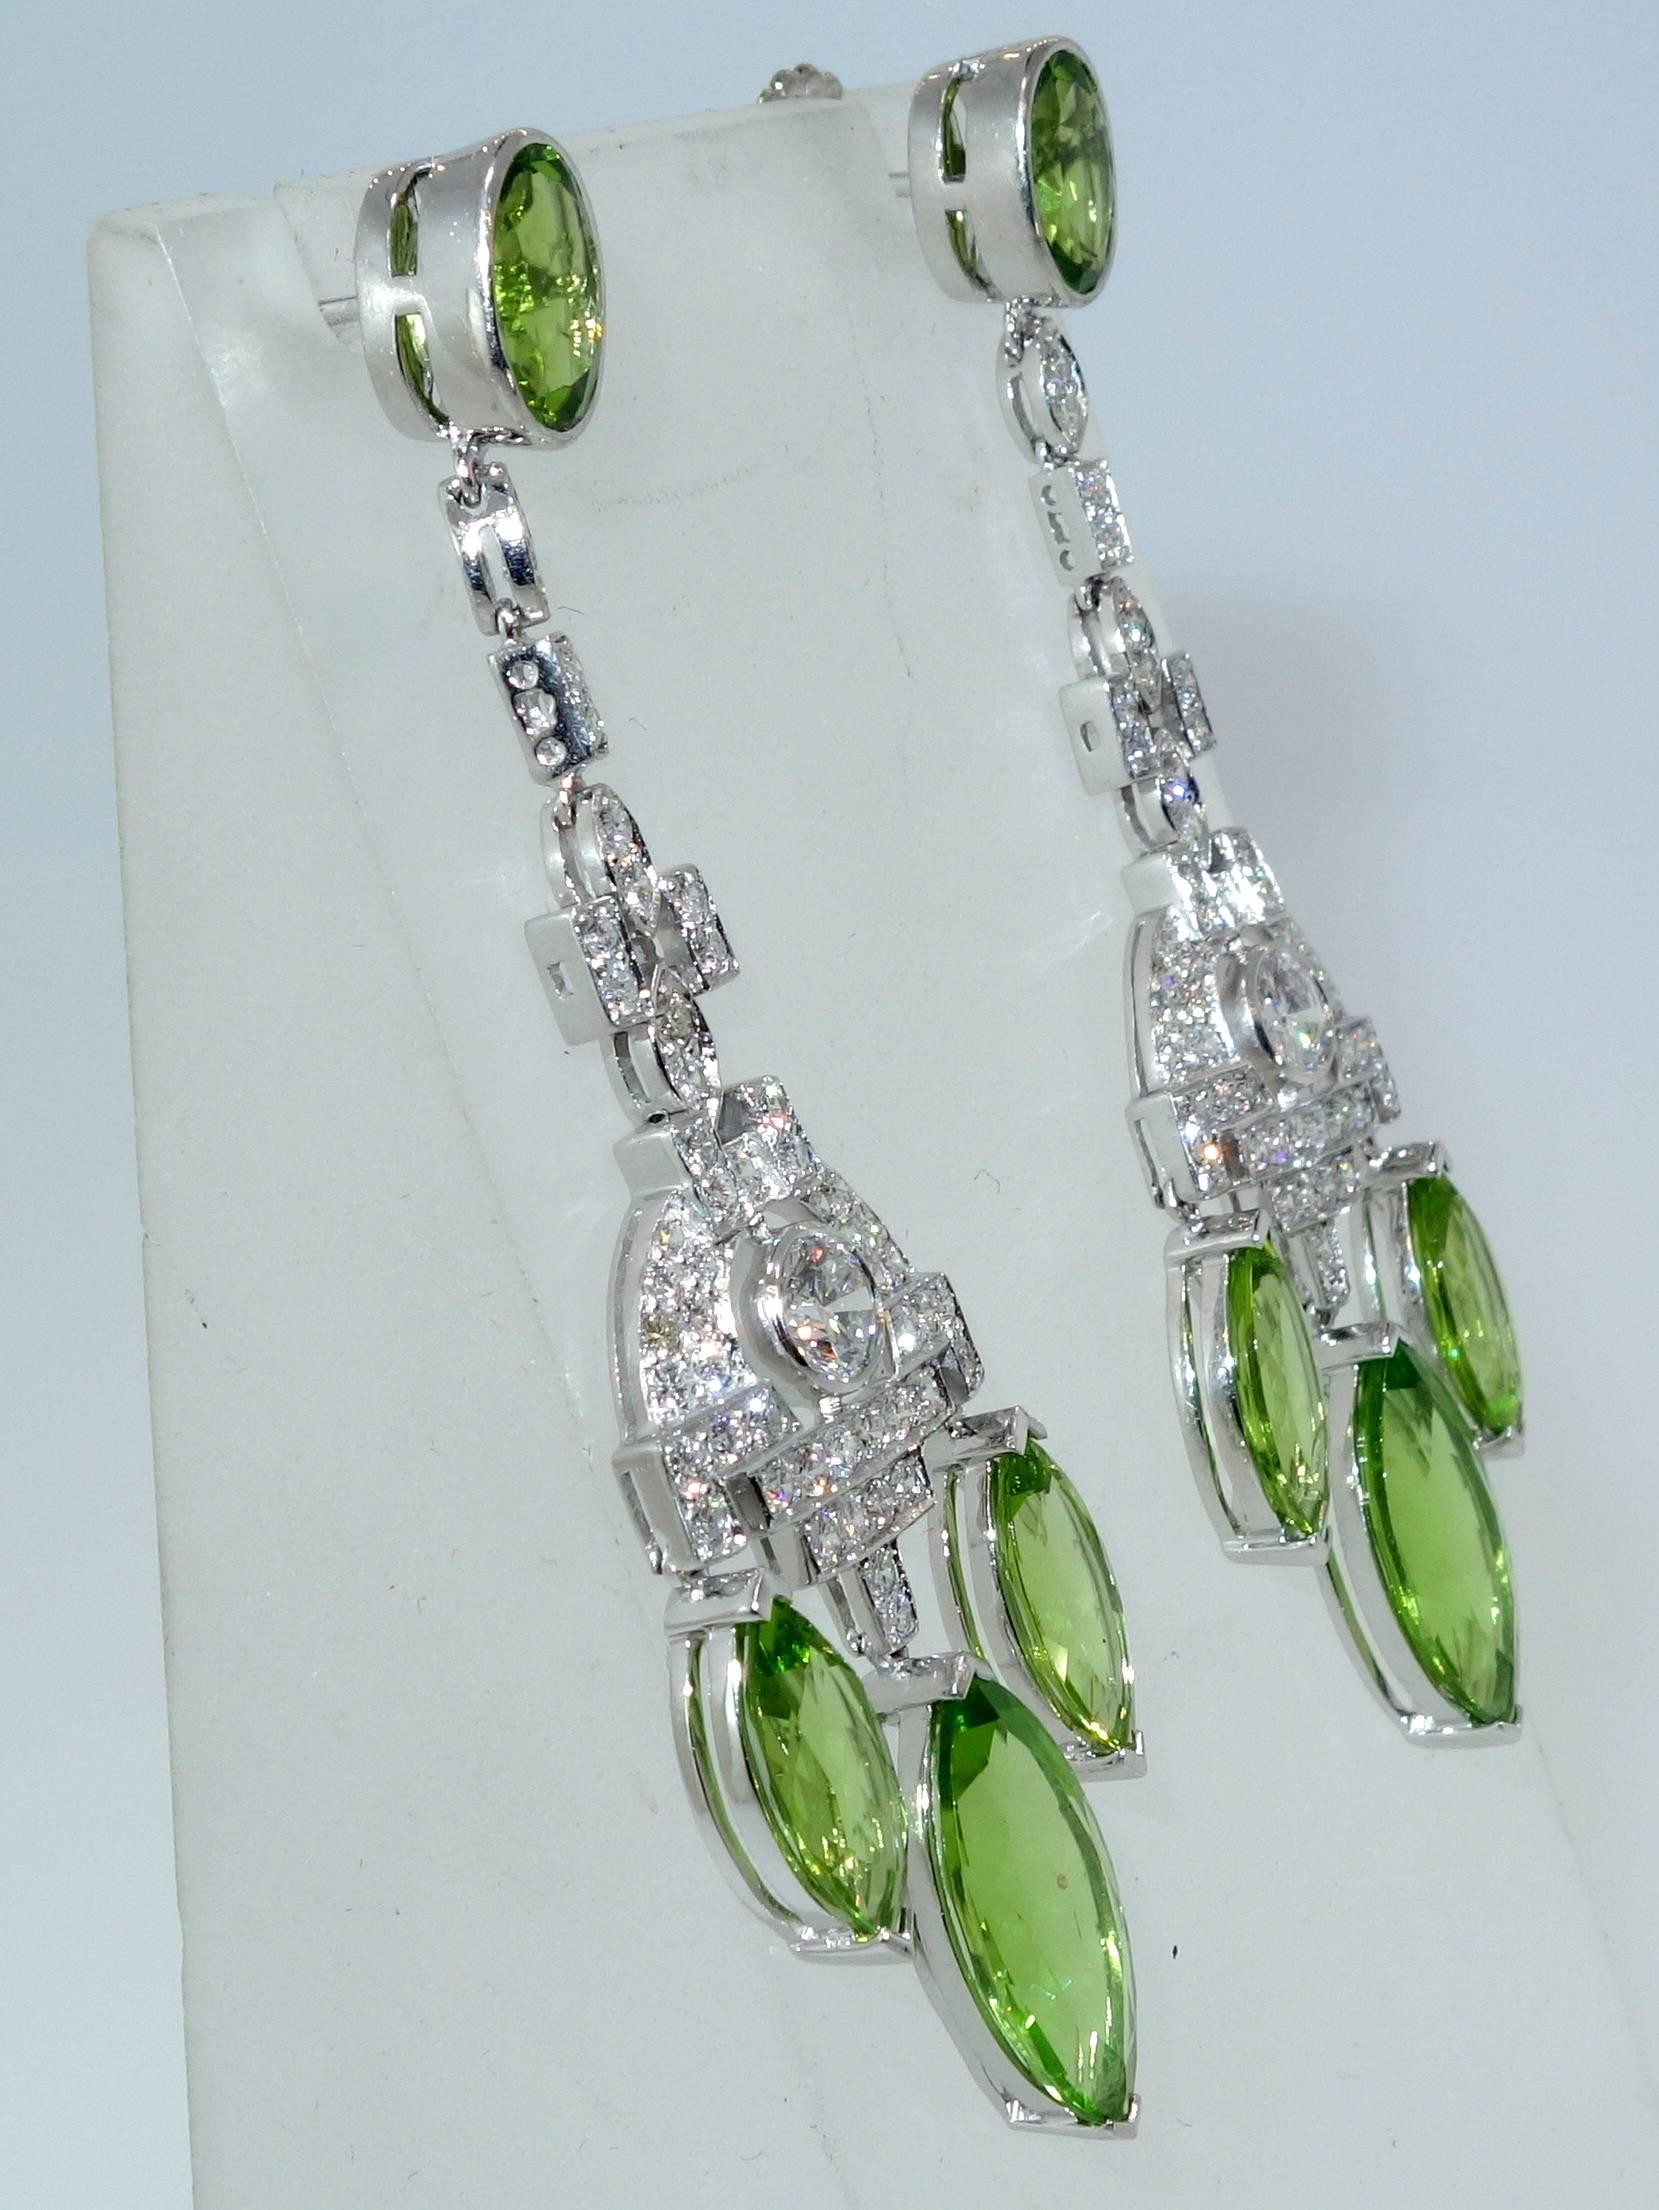 Chandelier Earrings in platinum possessing 20 cts., of natural fine bright green peridot with 3 cts of near colorless, very slightly included, well matched diamonds, (H), near colorless and very slightly included (VS1).  These earrings are 2.5/6